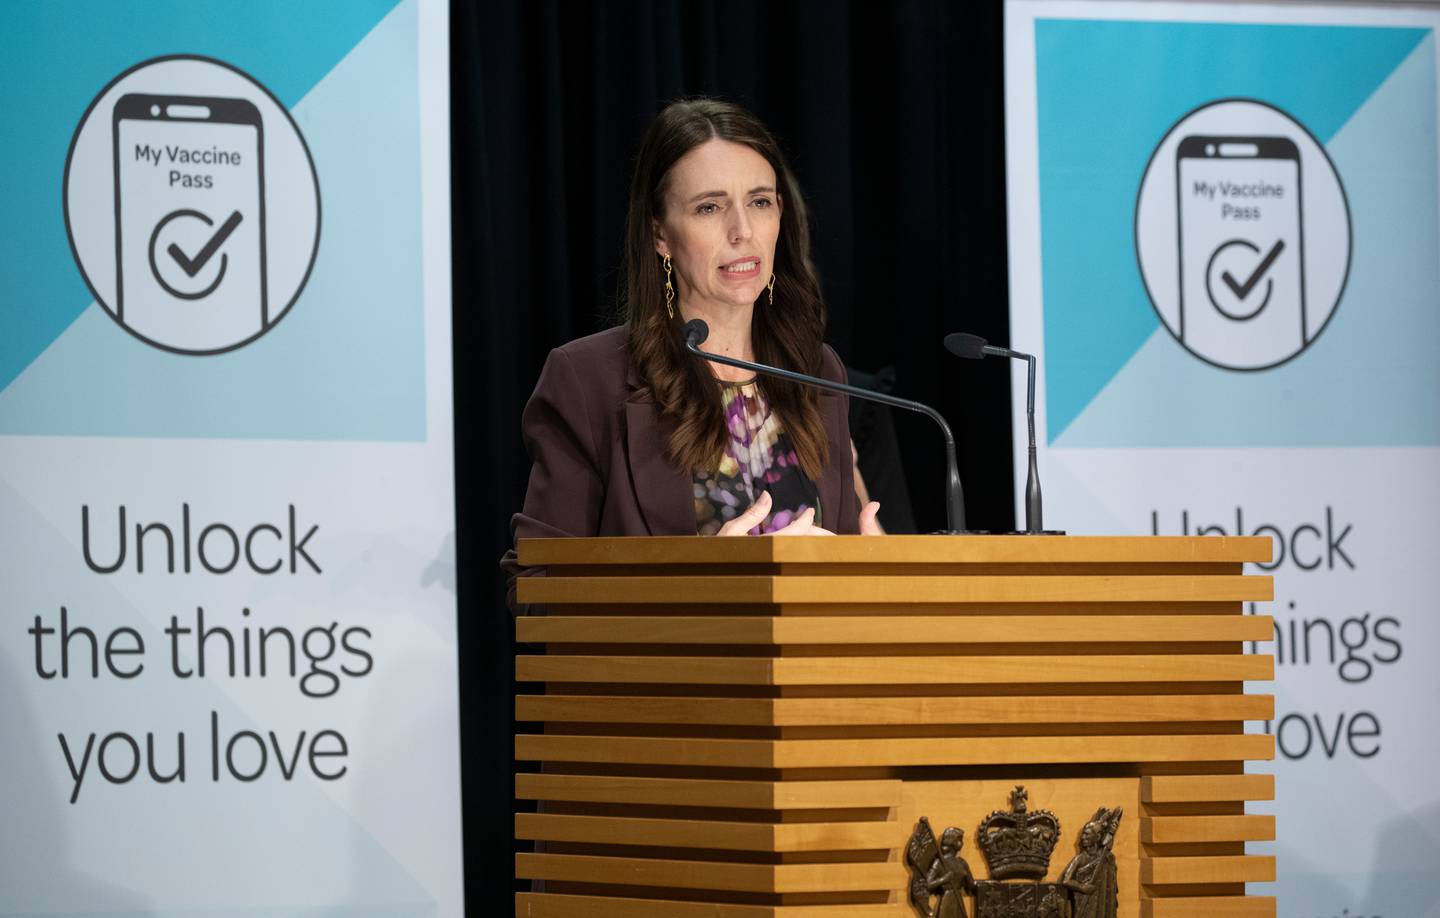 Prime Minister Jacinda Ardern announces which areas will move to a red light under the new Covid Protection Framework being introduced on Friday. Photo / Mark Mitchell